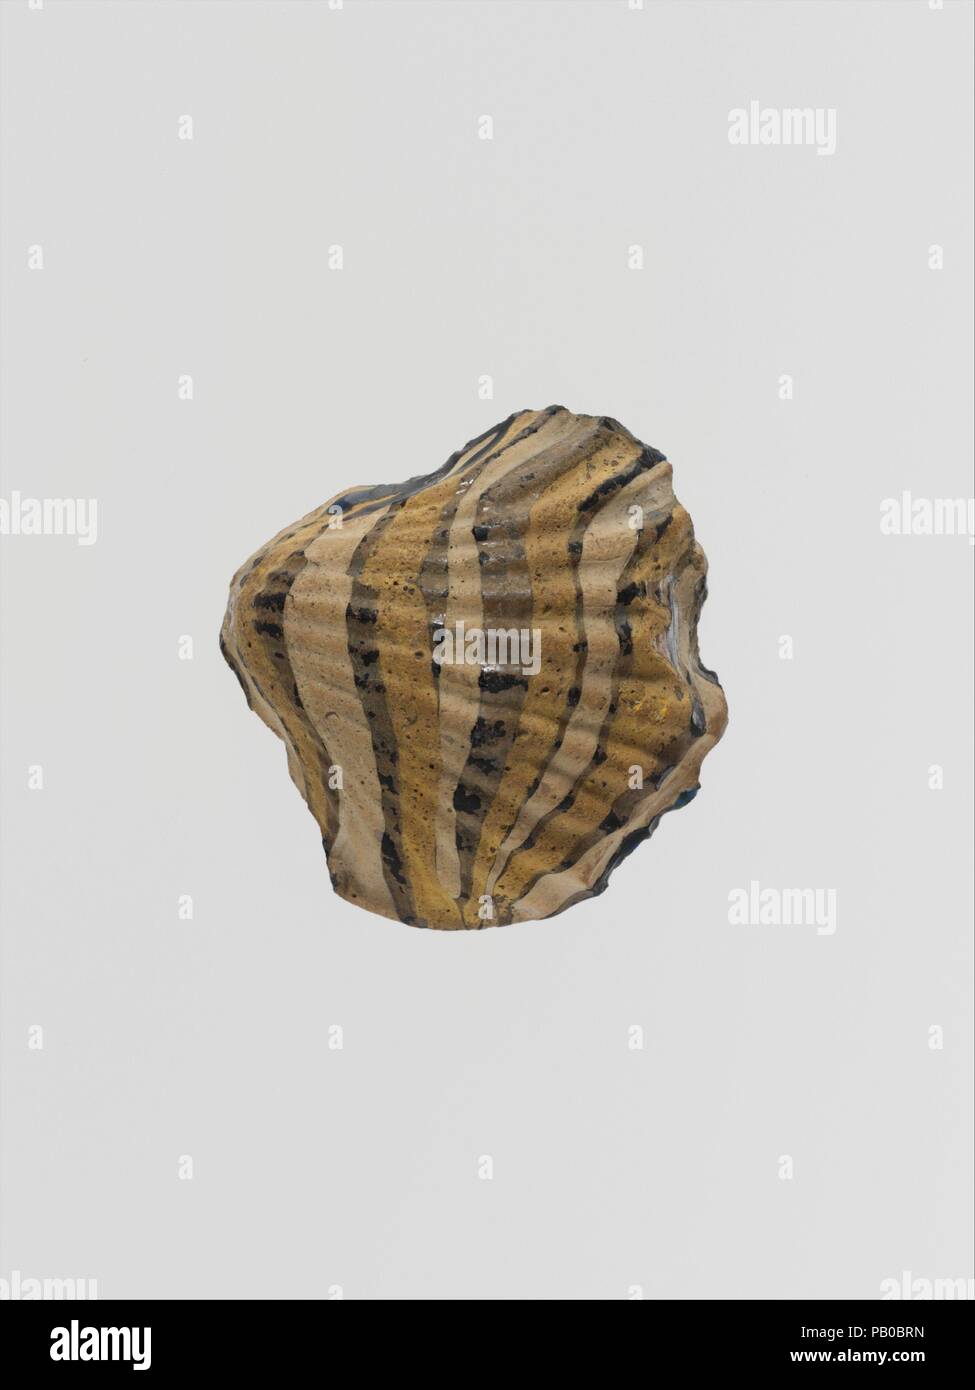 Glass mosaic ornament in the form of a shell. Culture: Roman. Dimensions: H.: 1 3/4 in. (4.4 cm). Date: ca. 1st century A.D..  Translucent cobalt blue, appearing black, with overlays in opaque white and yellow.  Solid block with flat underside in the shape of a bivalve mollusc with radiating ribs.  Decoration of nine marvered trails applied across shell in alternating yellow and white.  Intact, but chipped around edges; dulling, pitting of surface bubbles, and faint iridescence.  This unusual object may have served as part of a wall inlay. Museum: Metropolitan Museum of Art, New York, USA. Stock Photo